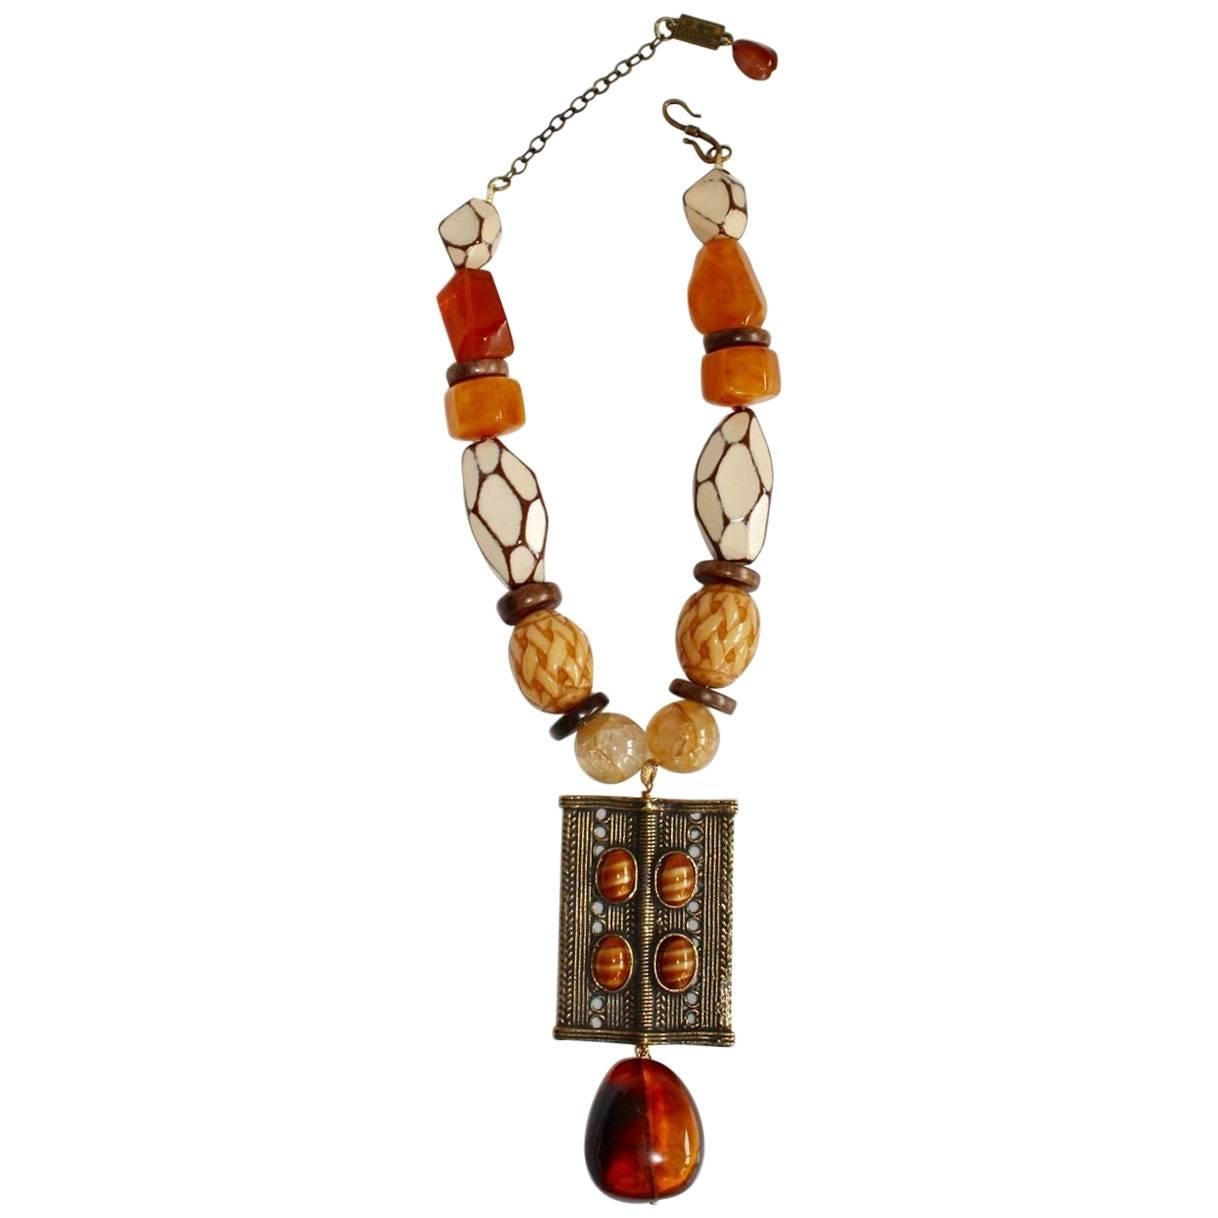 Philippe Ferrandis Limited Series Glass, Wood, Carnelian, and Citrine Necklace